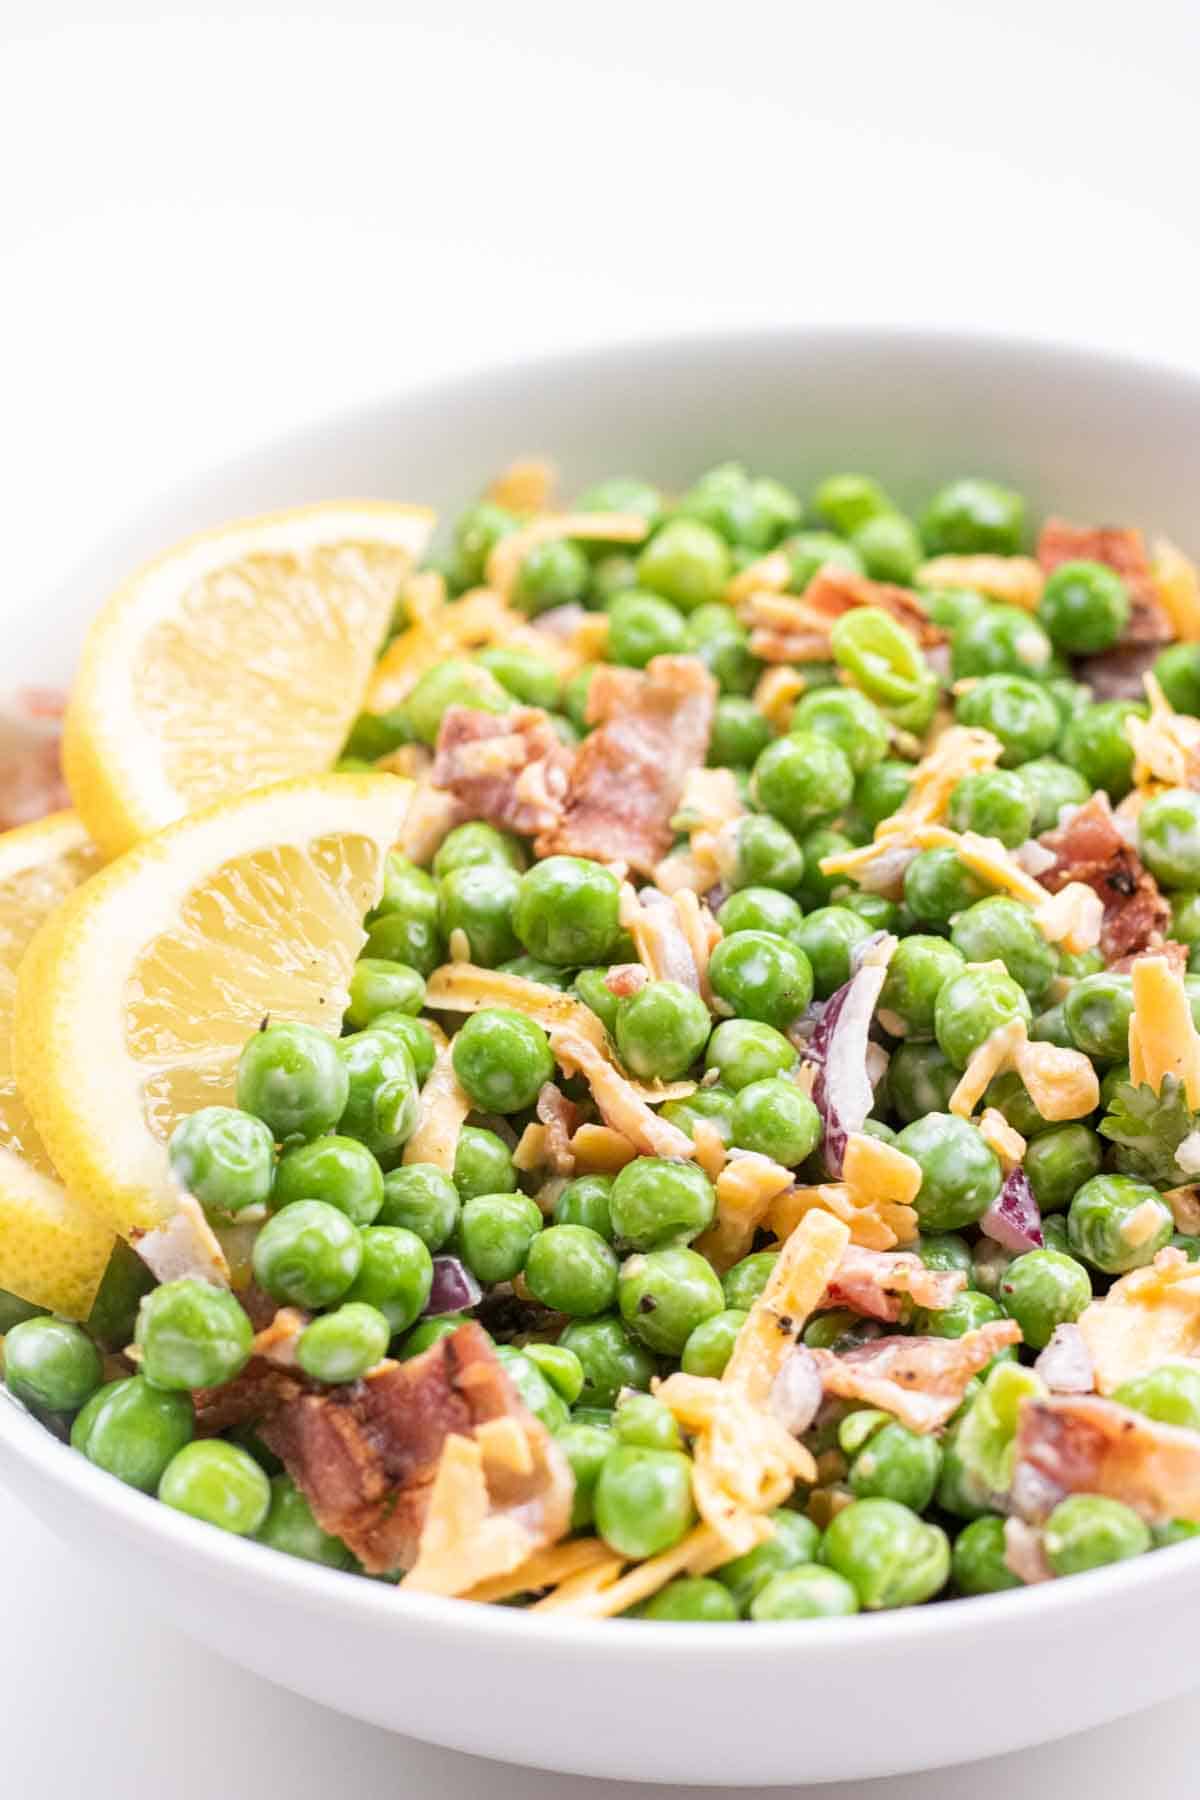 english pea salad in a white bowl with bacon and cheddarcheese